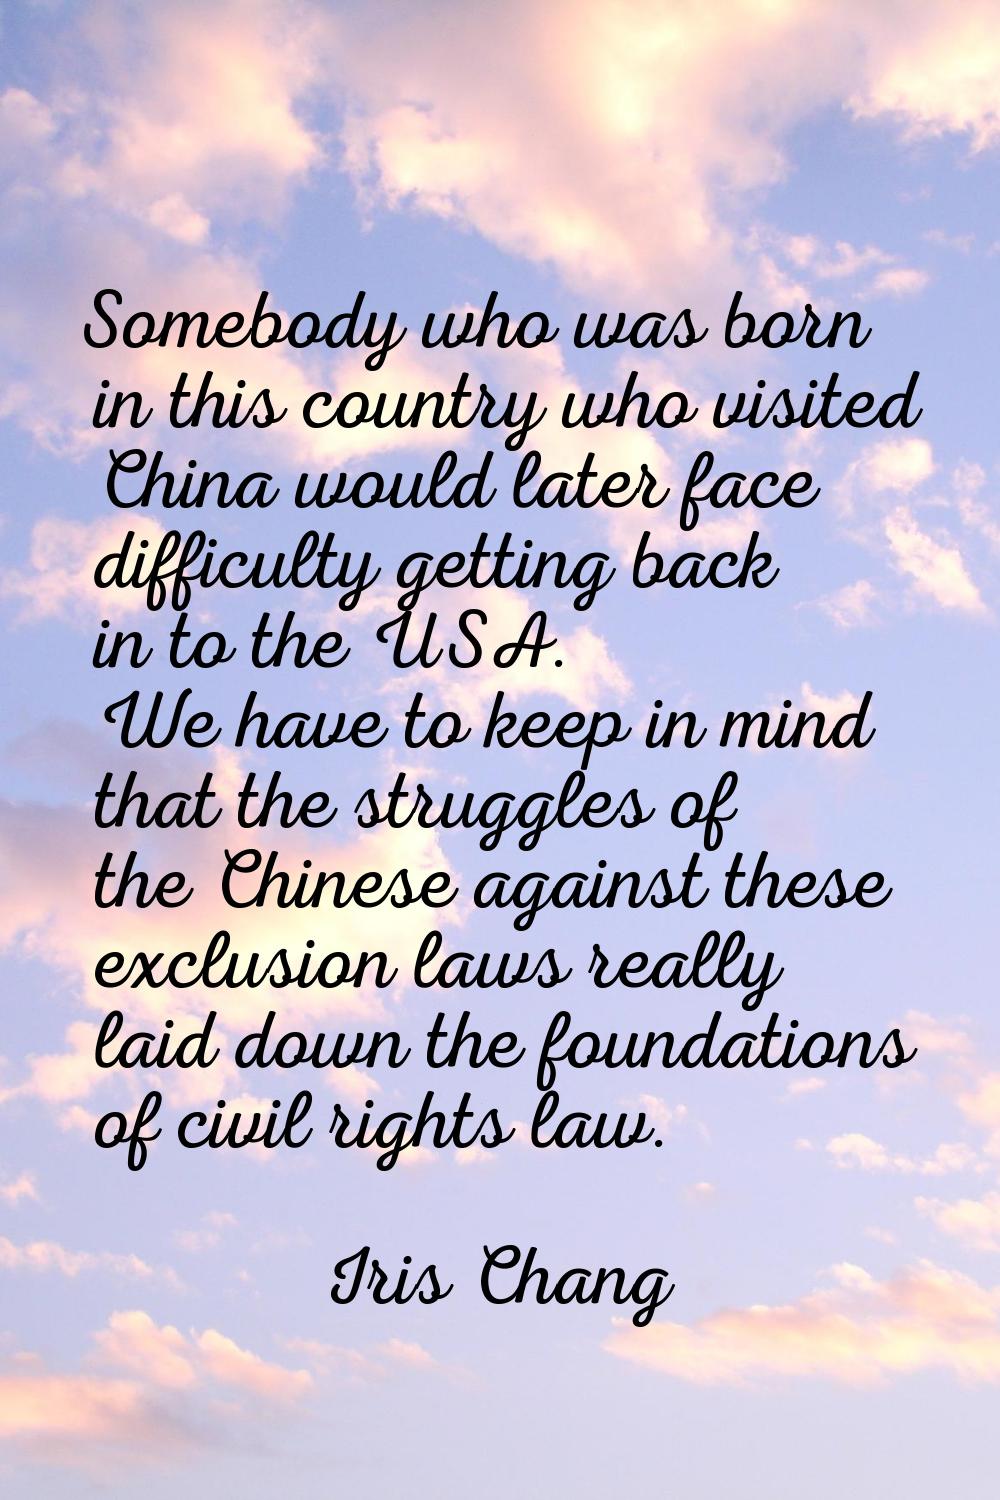 Somebody who was born in this country who visited China would later face difficulty getting back in